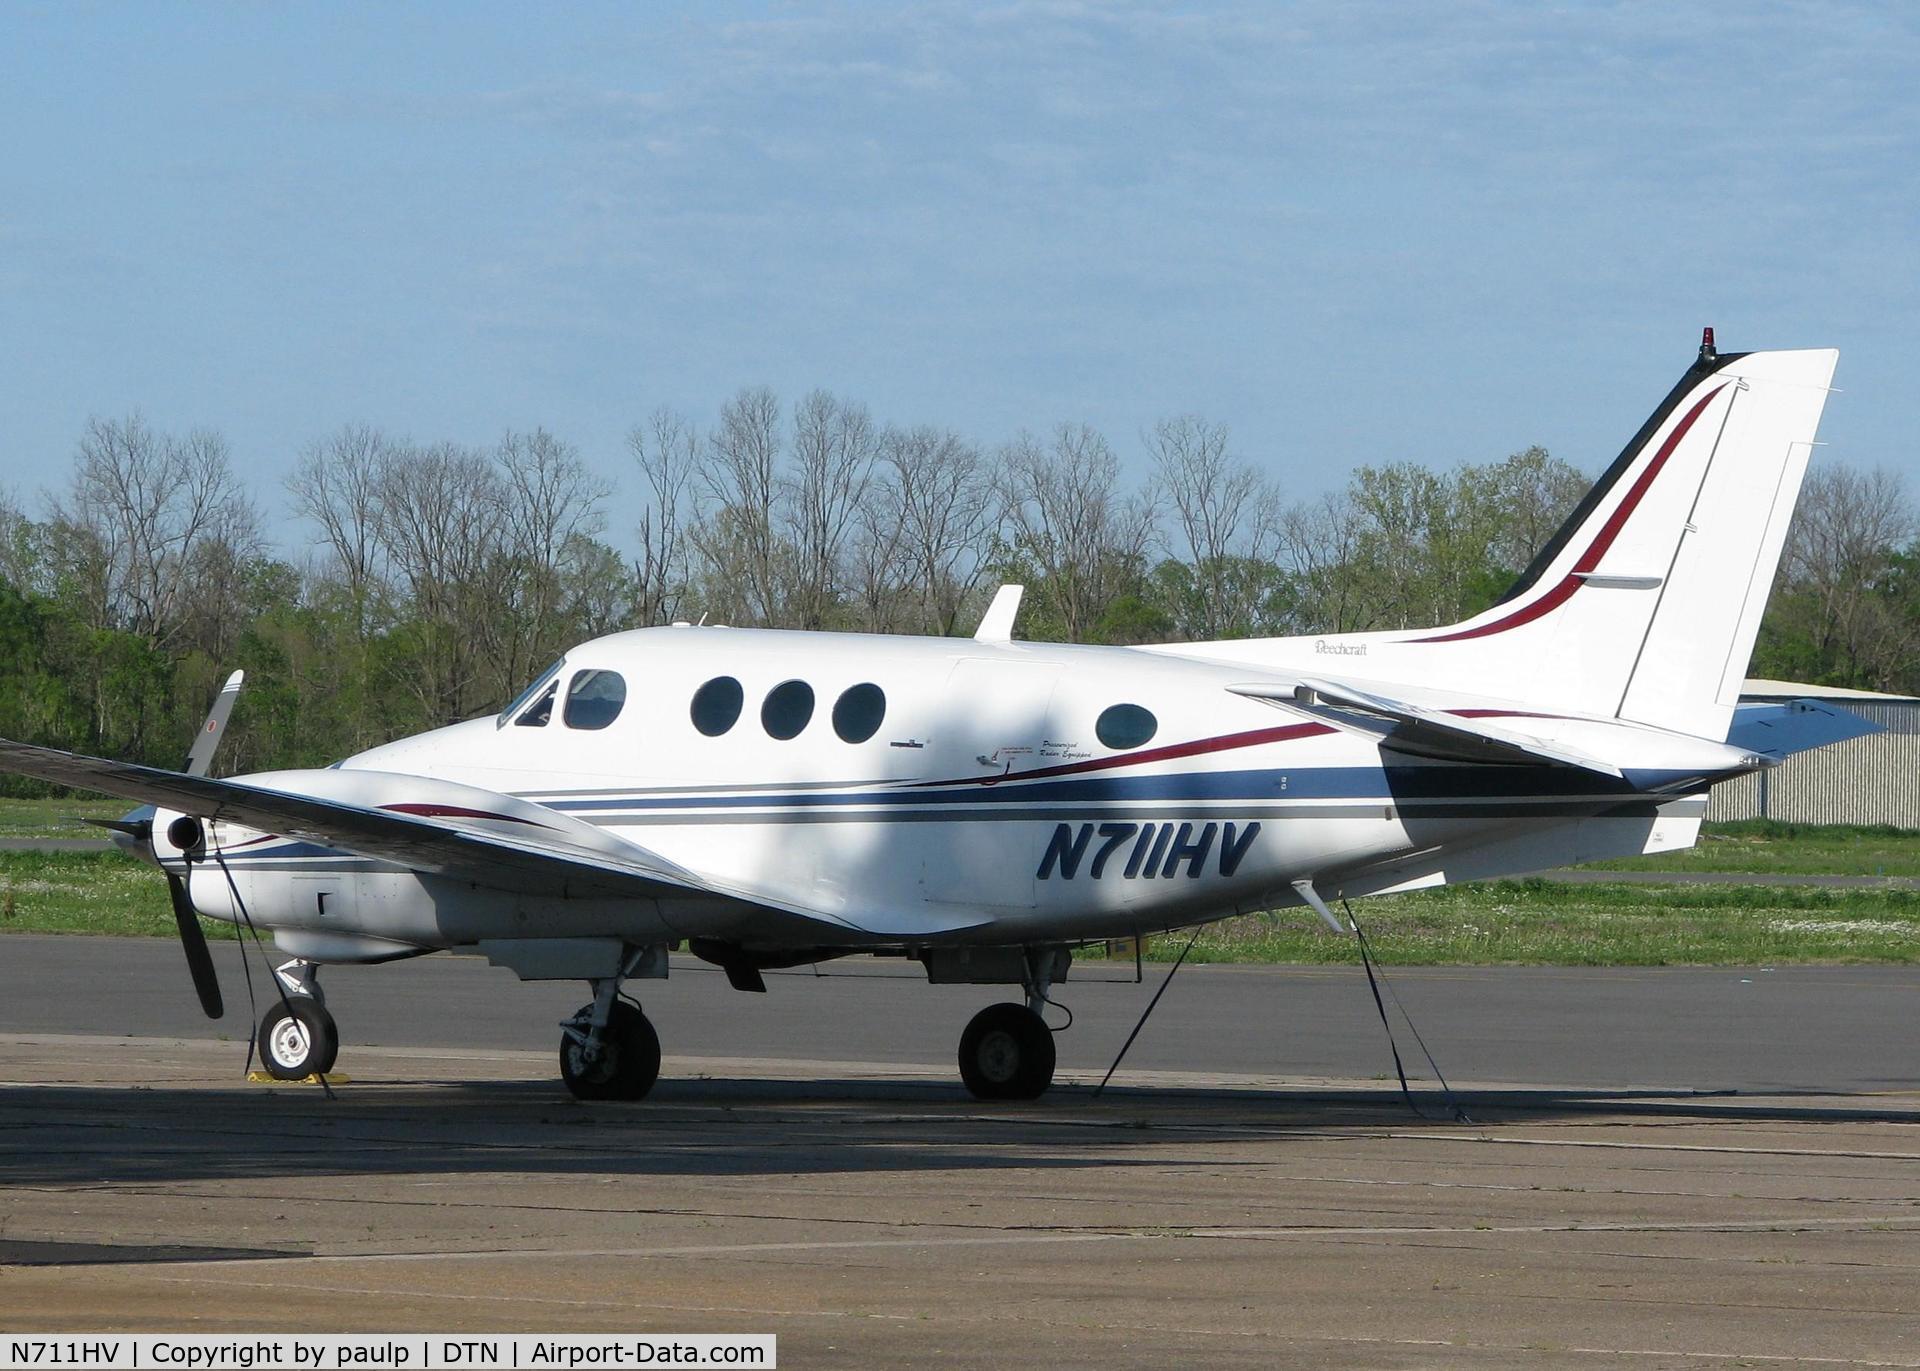 N711HV, Beech E-90 King Air C/N LW-246, Parked at the Shreveport Downtown airport.